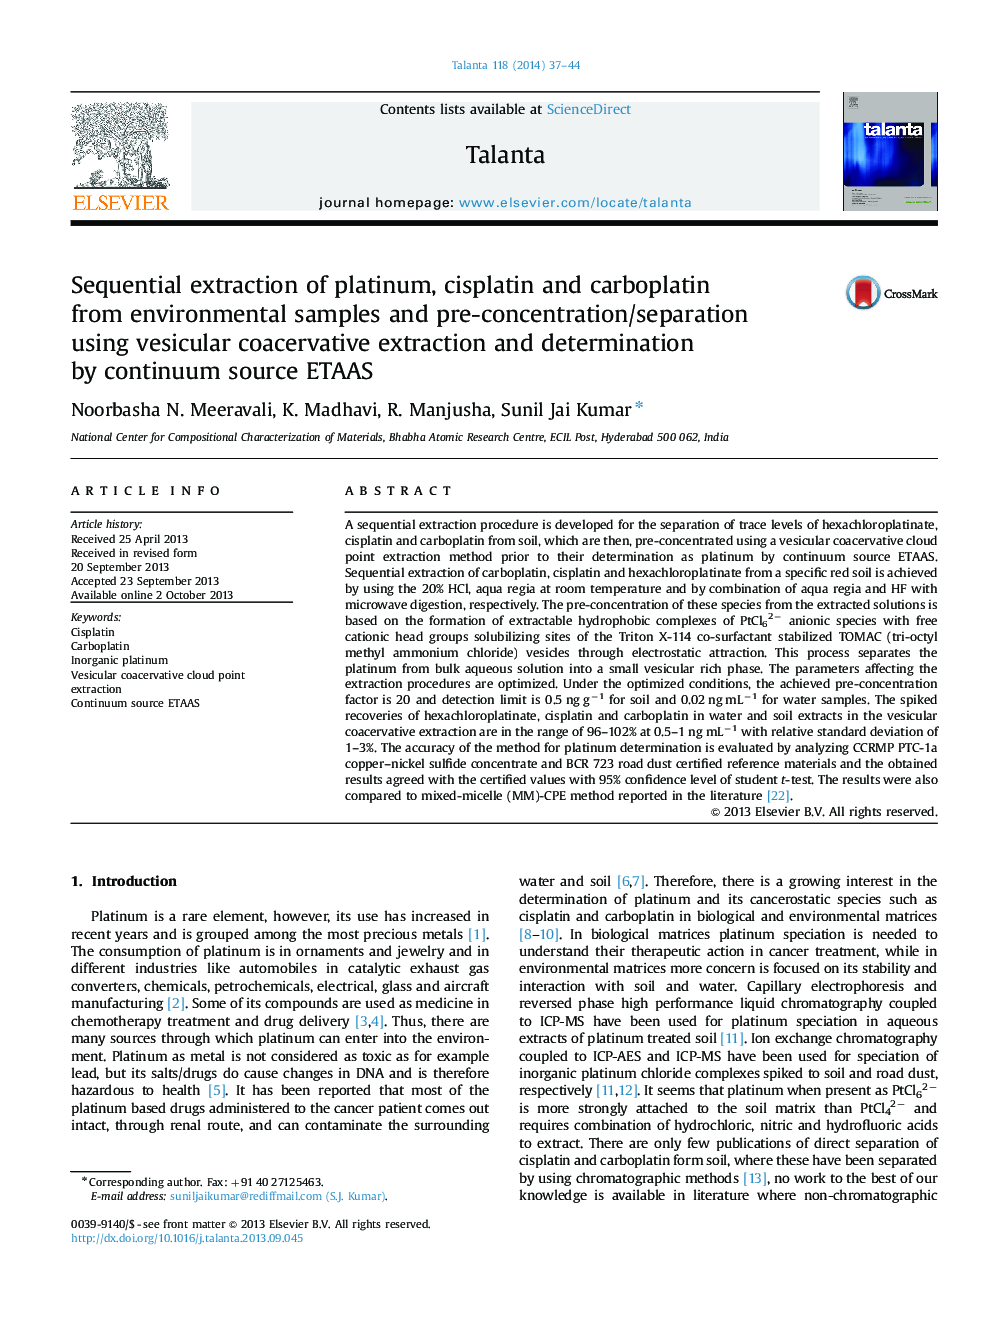 Sequential extraction of platinum, cisplatin and carboplatin from environmental samples and pre-concentration/separation using vesicular coacervative extraction and determination by continuum source ETAAS